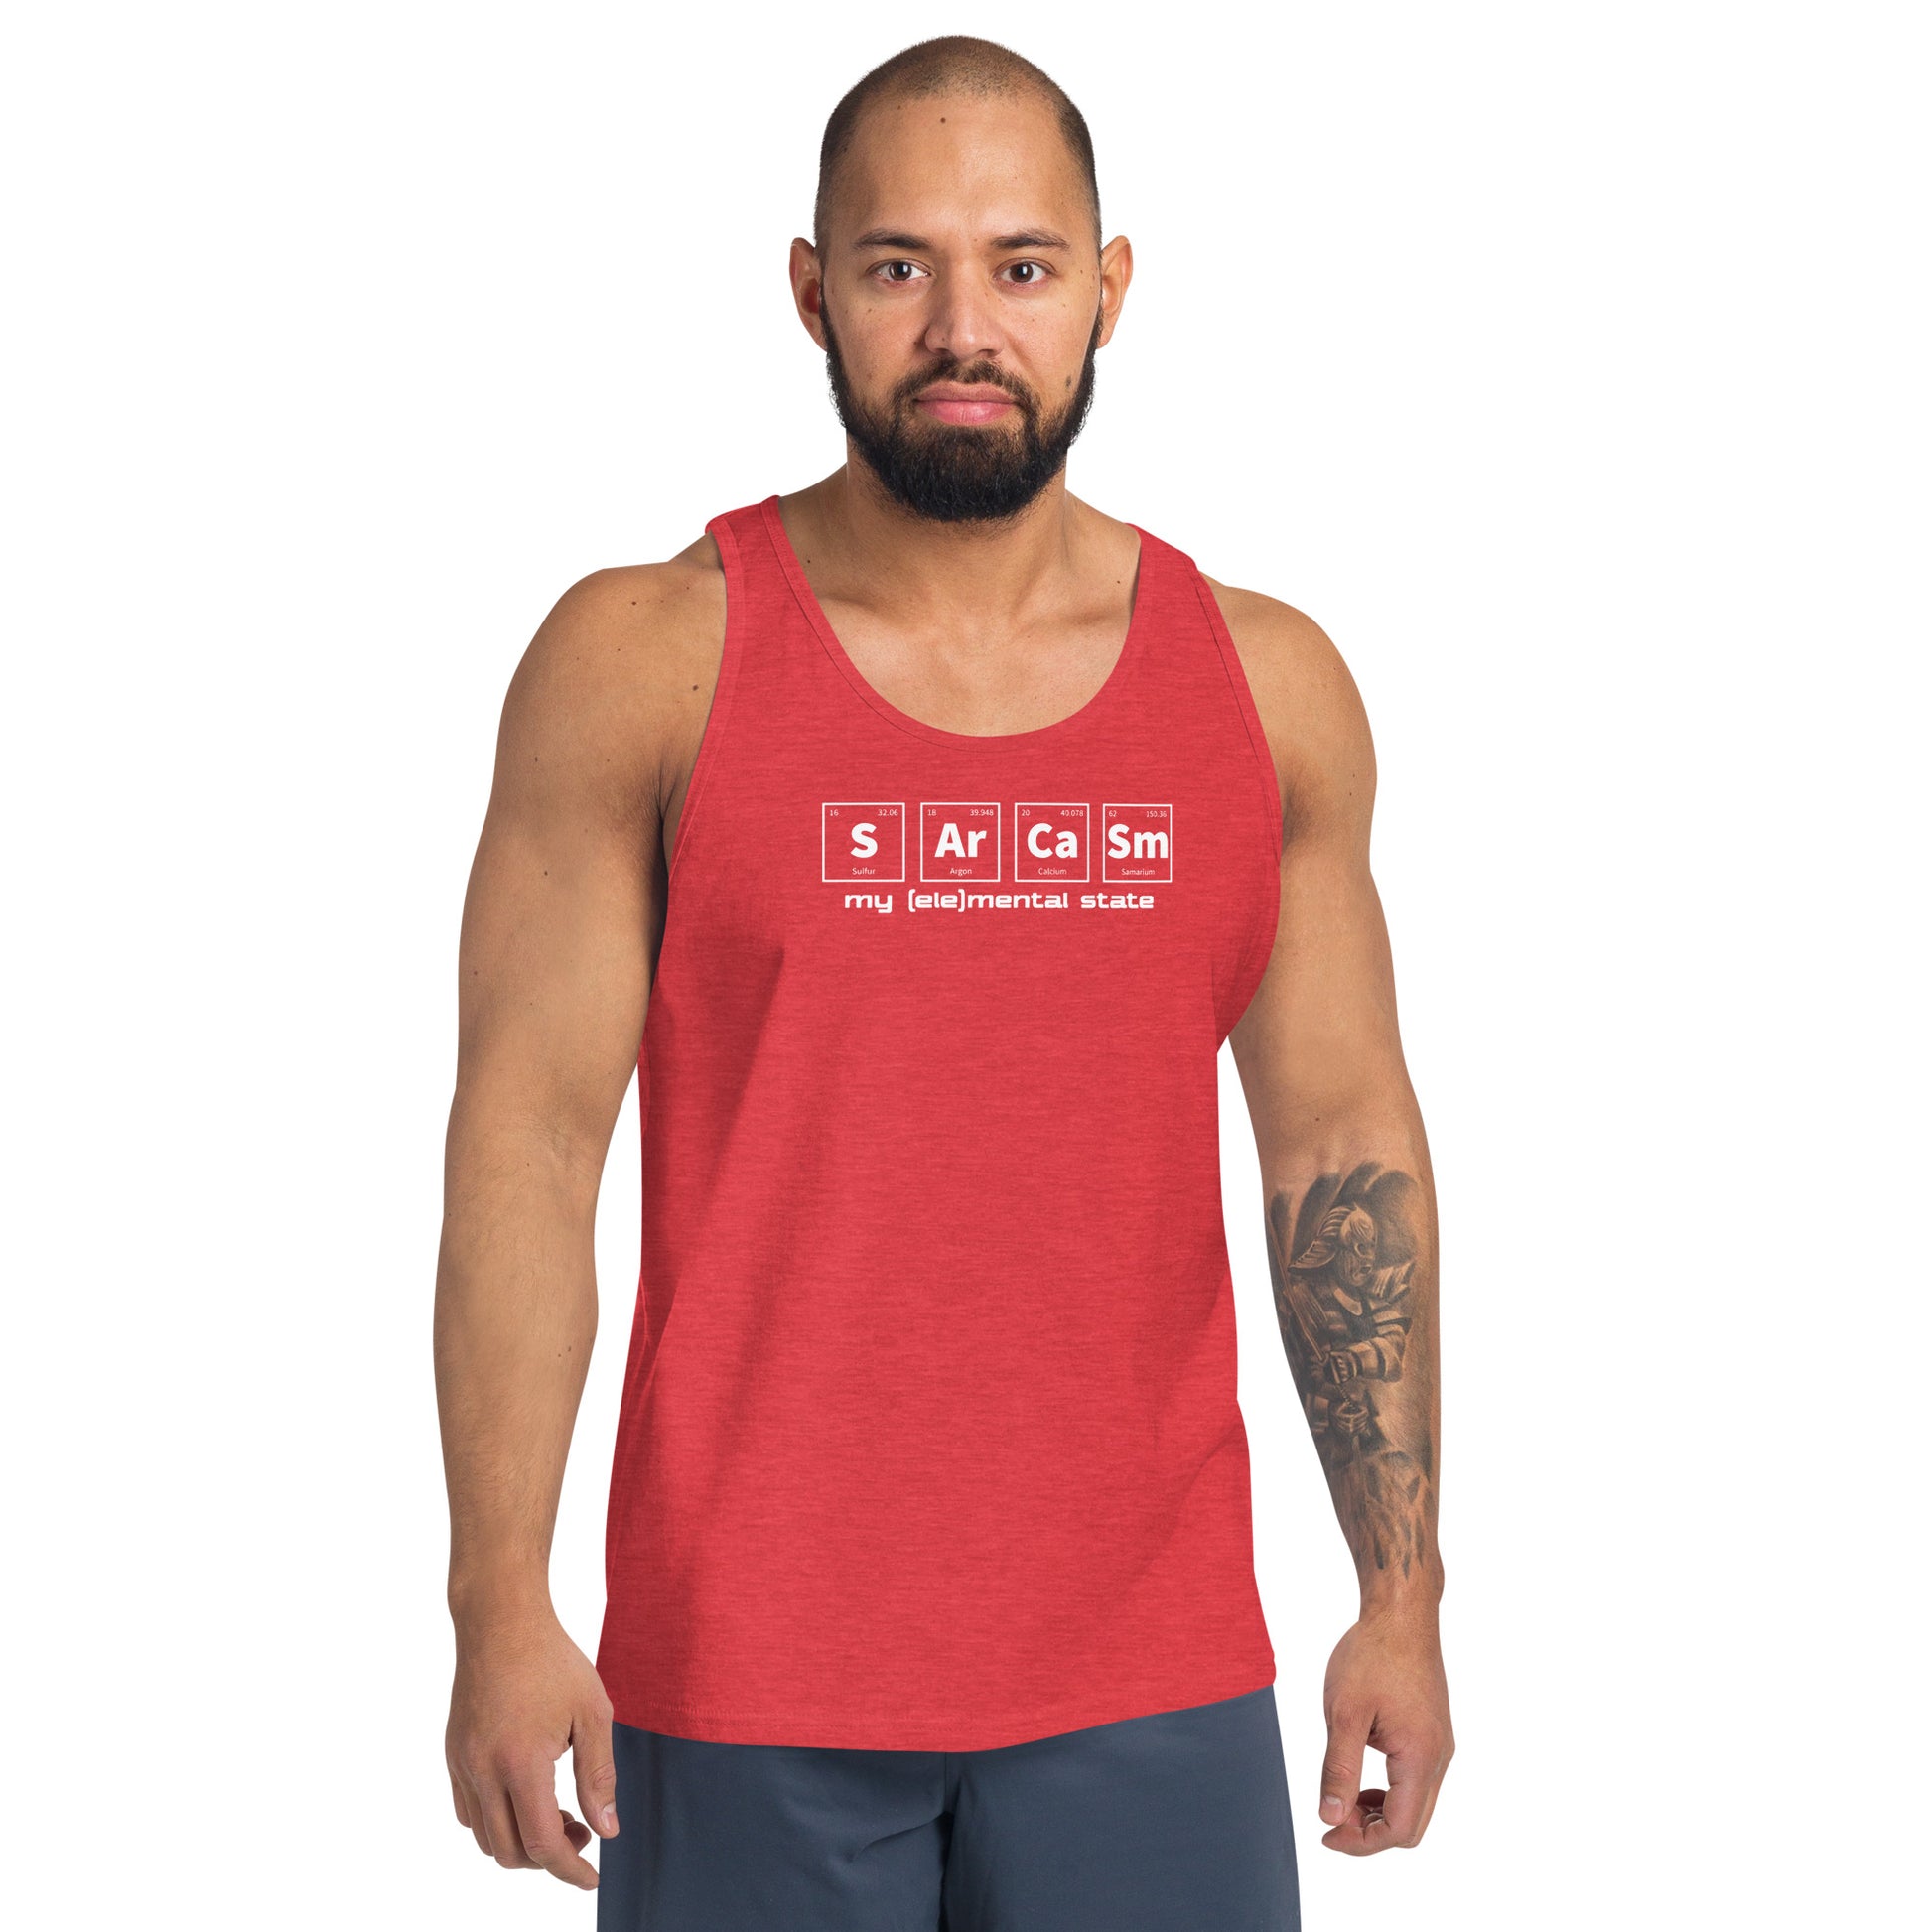 Model wearing Red Triblend unisex tank top with graphic of periodic table of elements symbols for Sulfur (S), Argon (Ar), Calcium (Ca), and Samarium (Sm) and text "my (ele)mental state"